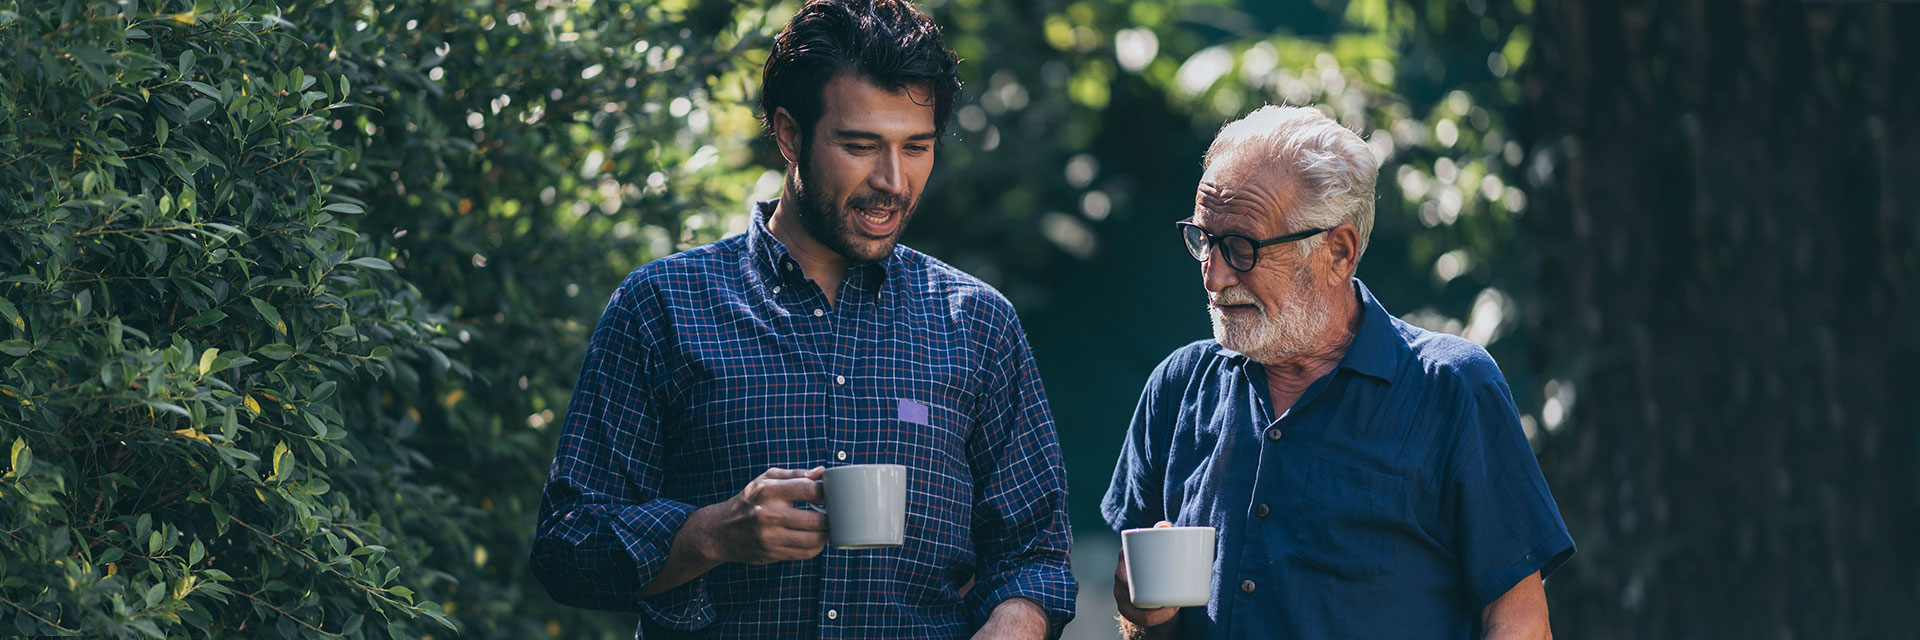 Older father and son holding mugs outdoors